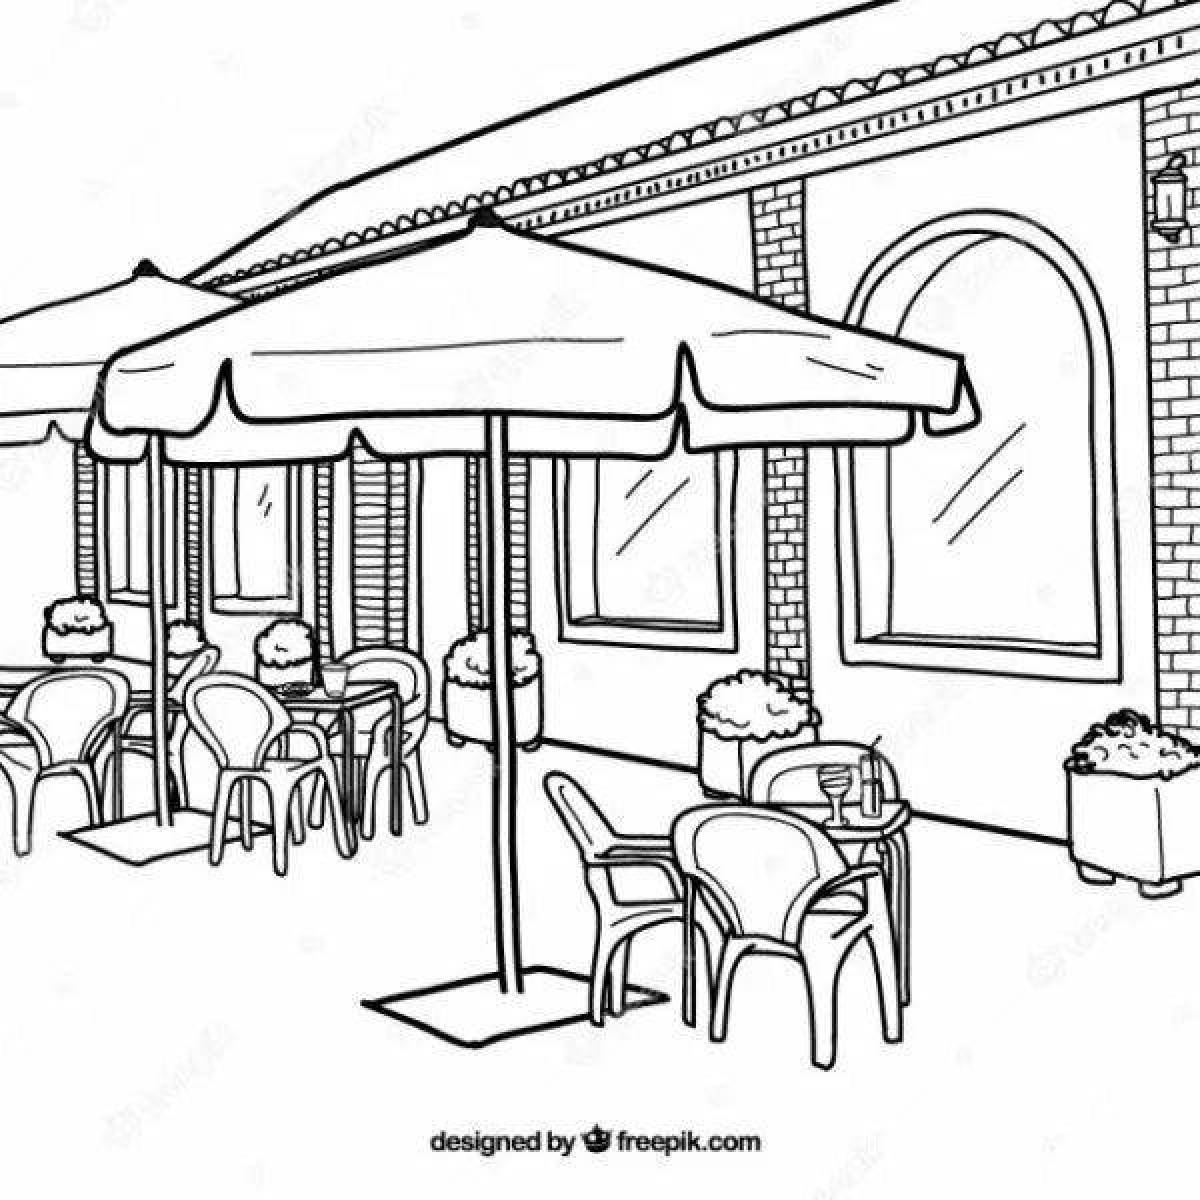 Cafe coloring page with rich colors